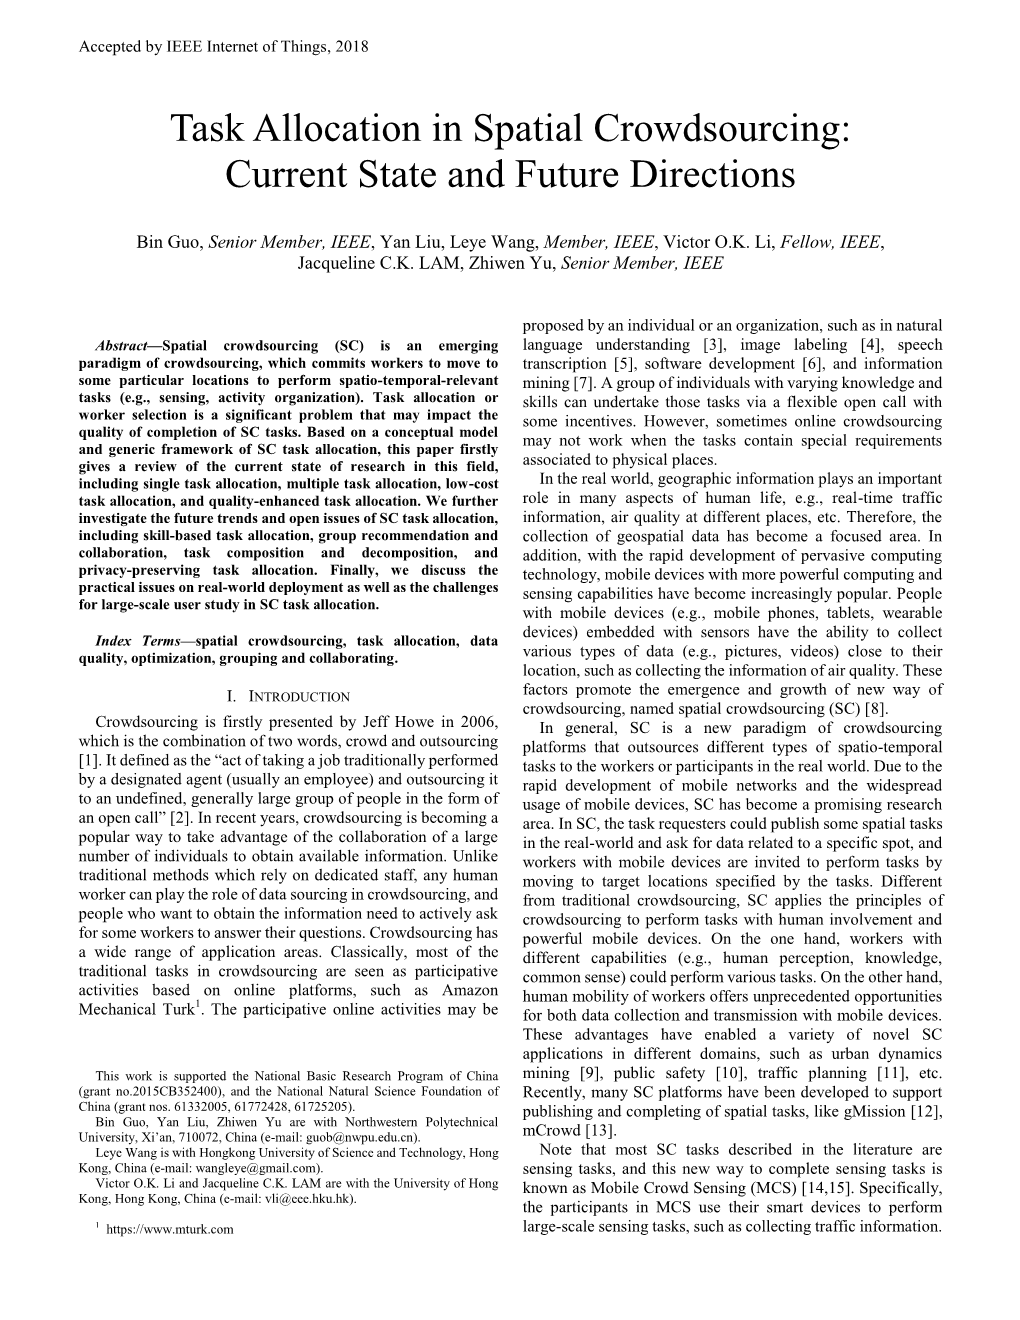 Task Allocation in Spatial Crowdsourcing: Current State and Future Directions